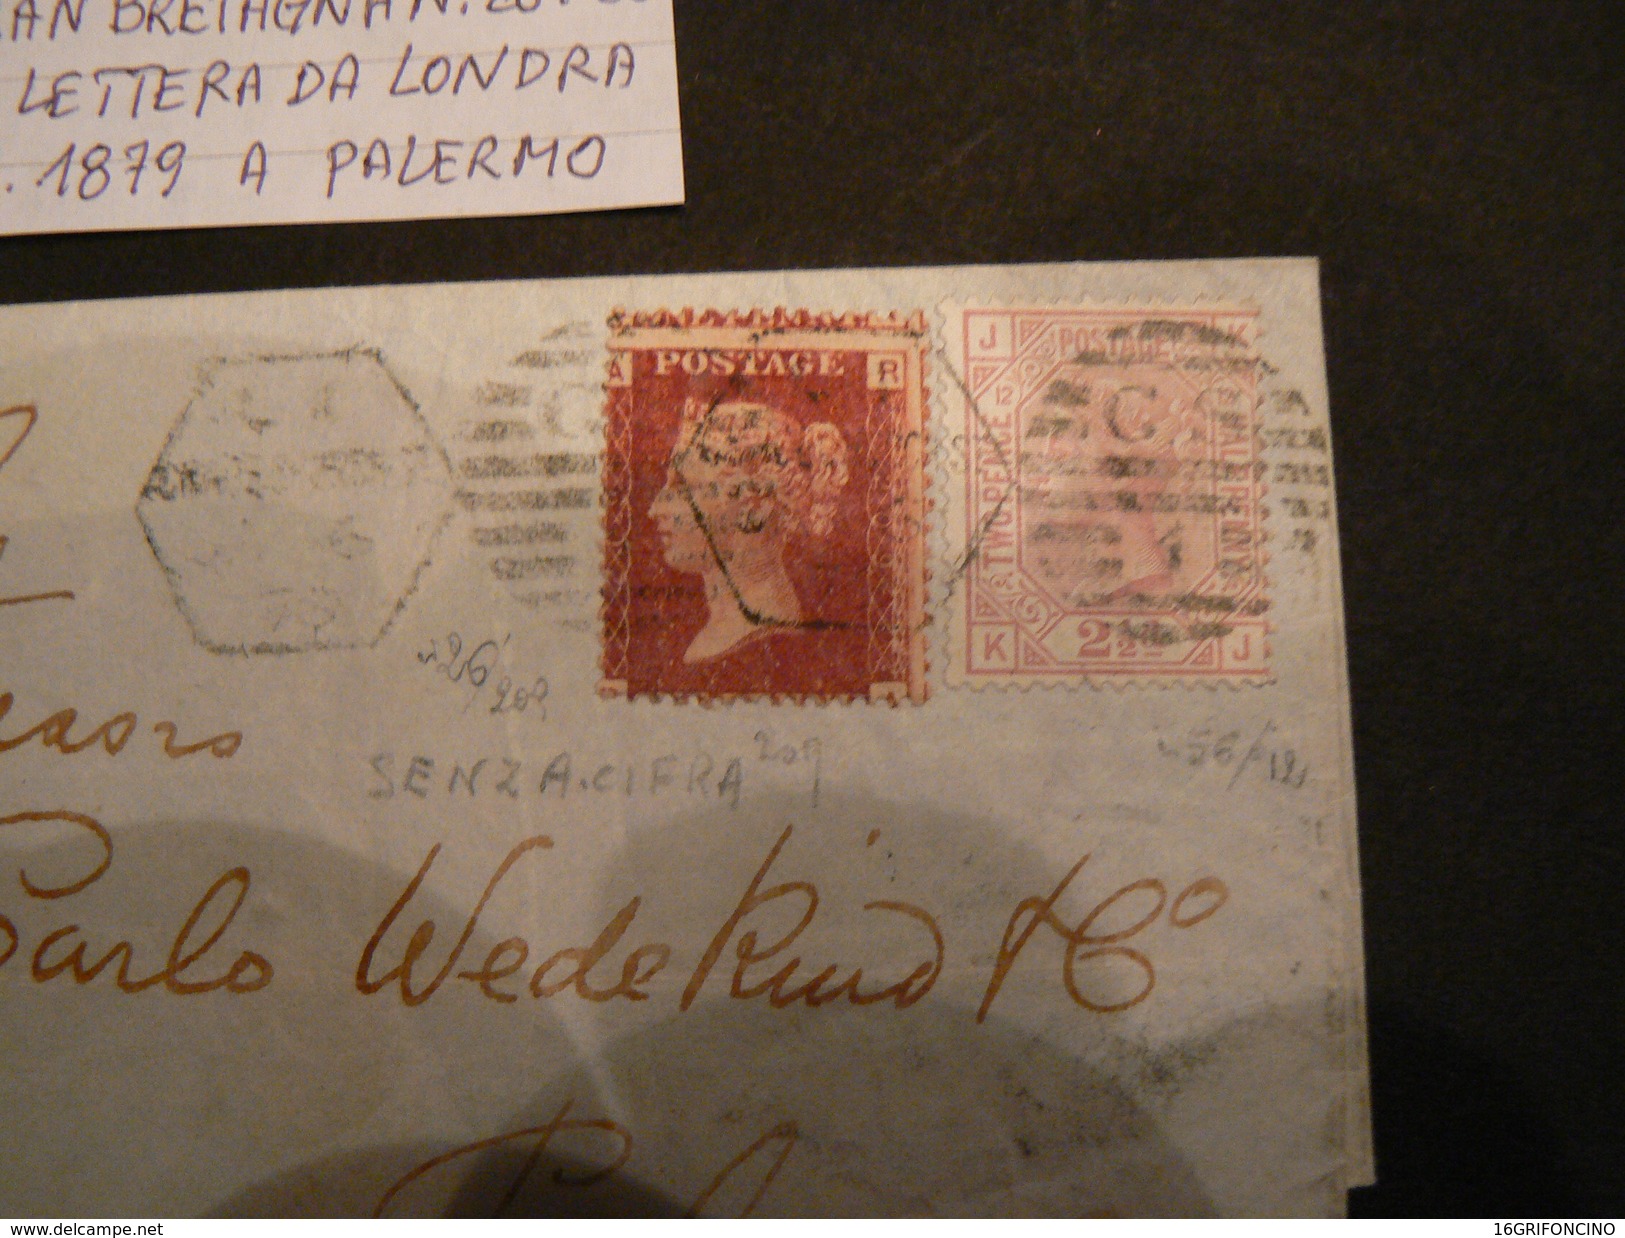 6 - 1 - 1870 SMALL LETTER WITH POSTAGESTAMPS OF1858 OF 1P. + 2 +1/2 P. ROSE...BELLA LETTERINA + 2 FRANCOBOLLI - Covers & Documents